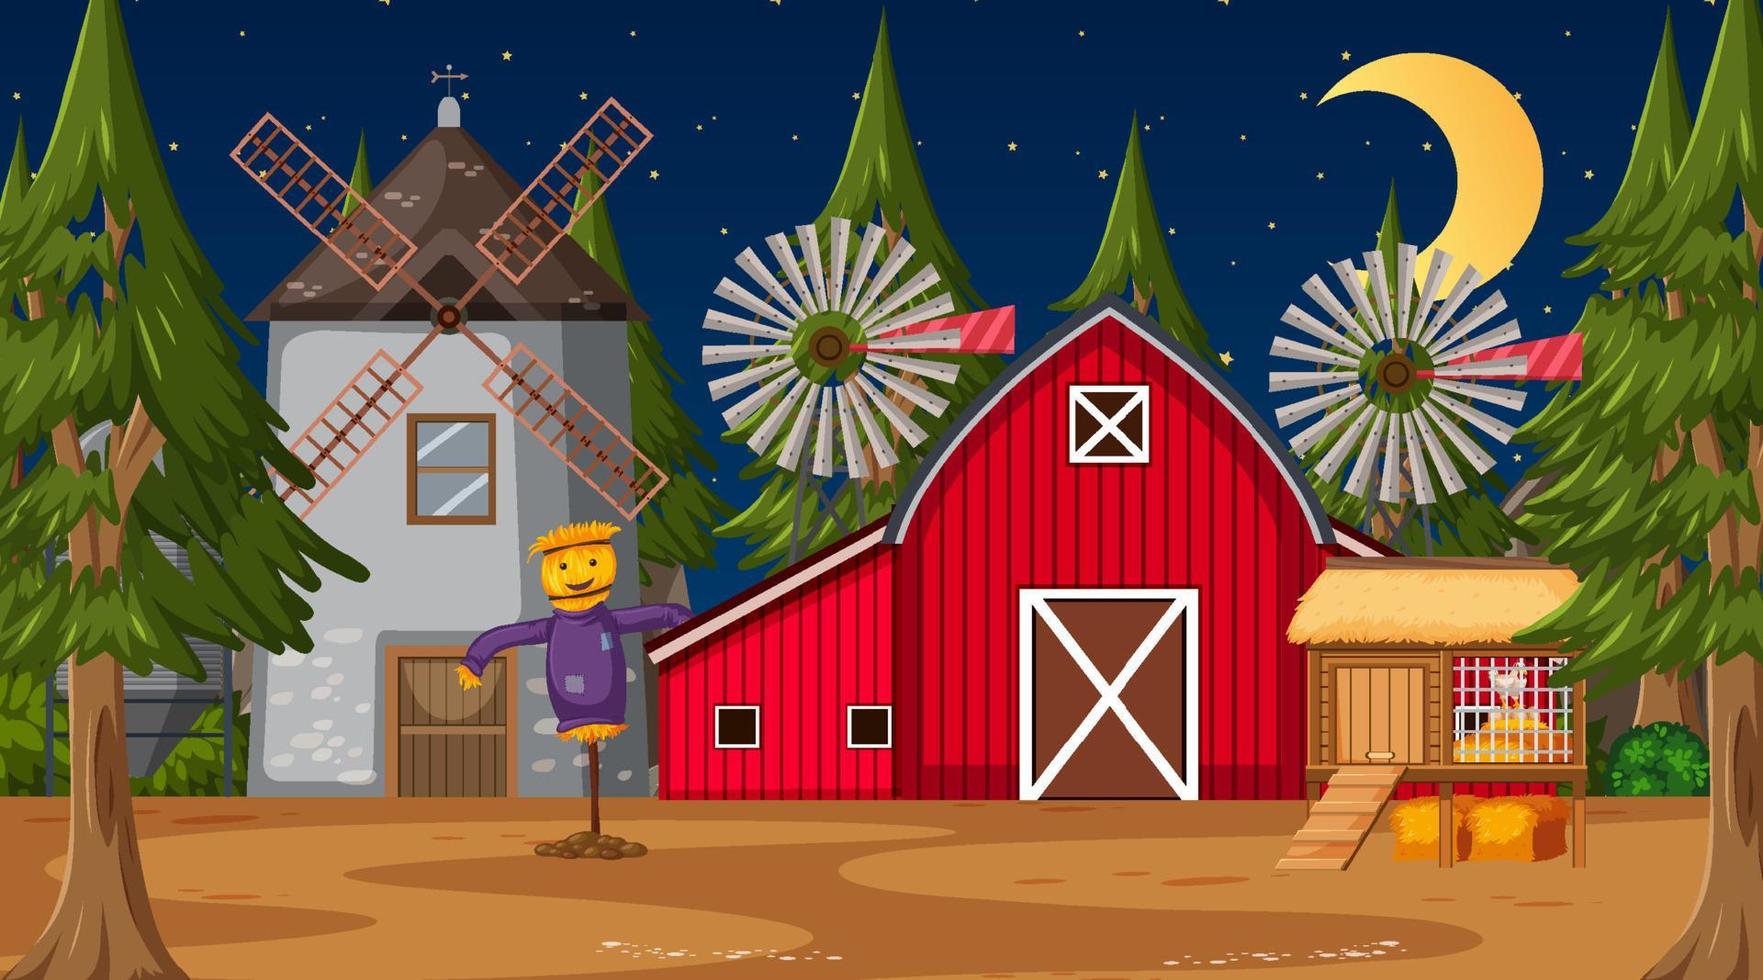 Empty farm at night scene with red barn and windmill vector